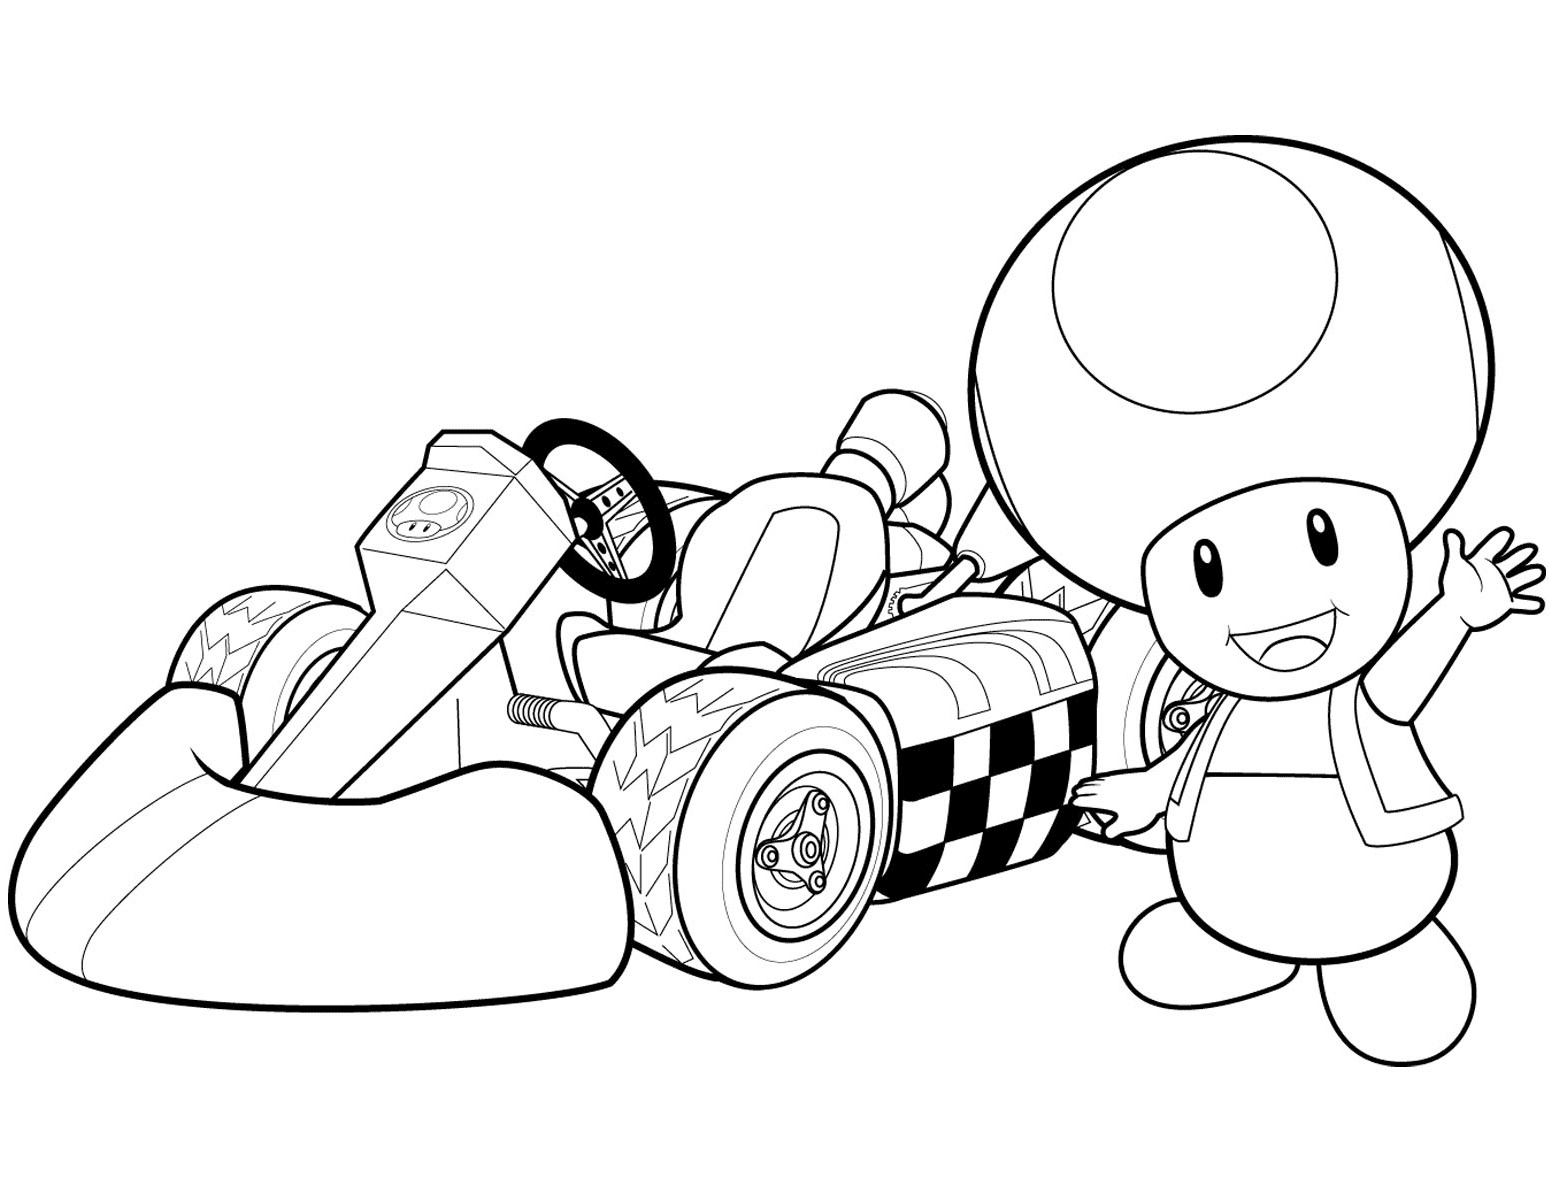 Toad Mario Kart for Wii 控制台中的 Toad from Toad Mario